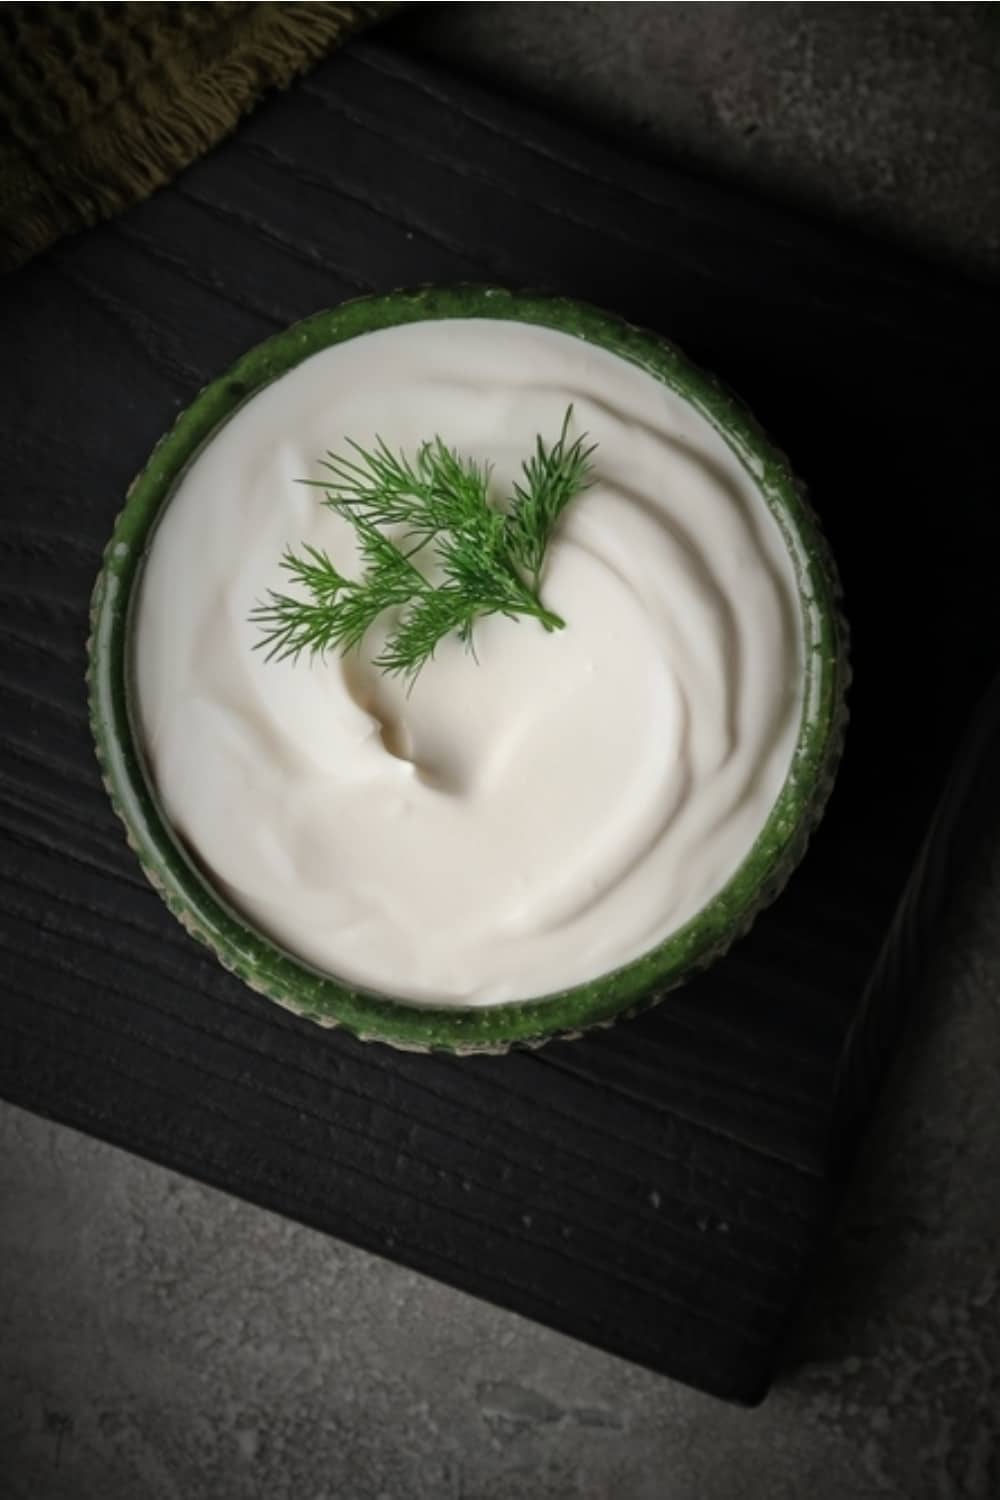 Sour Cream in a green bowl on the table